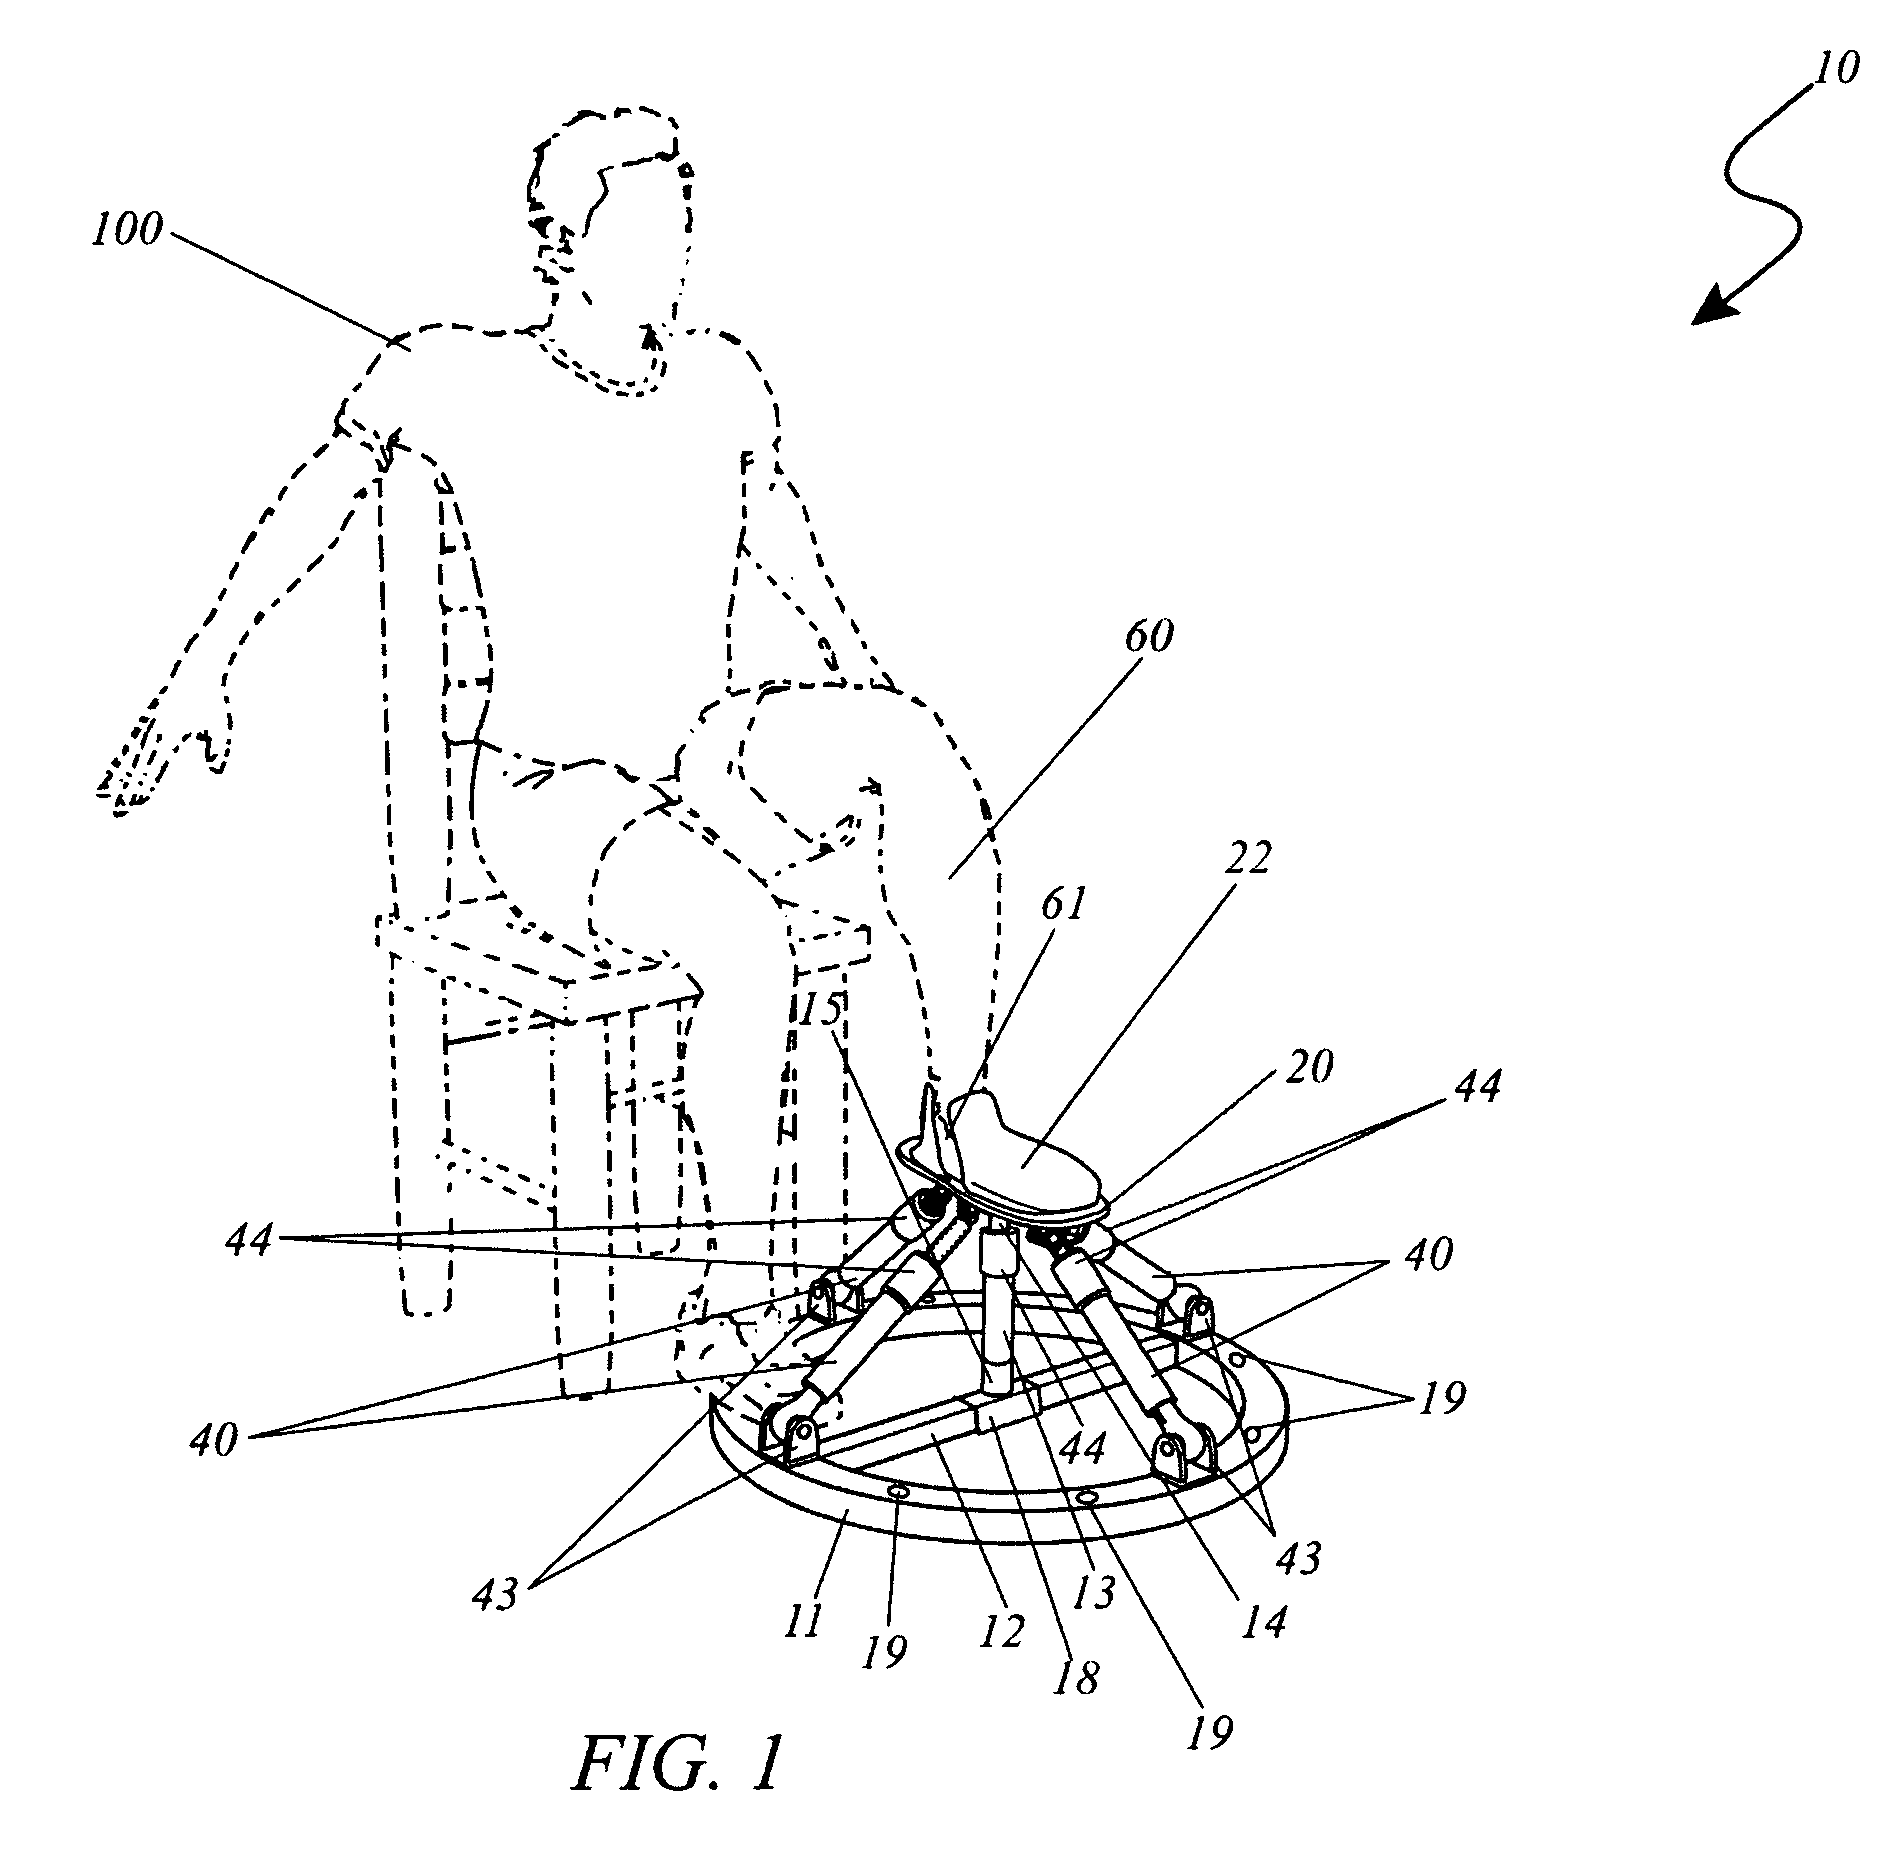 Shock absorber ankle exercise device